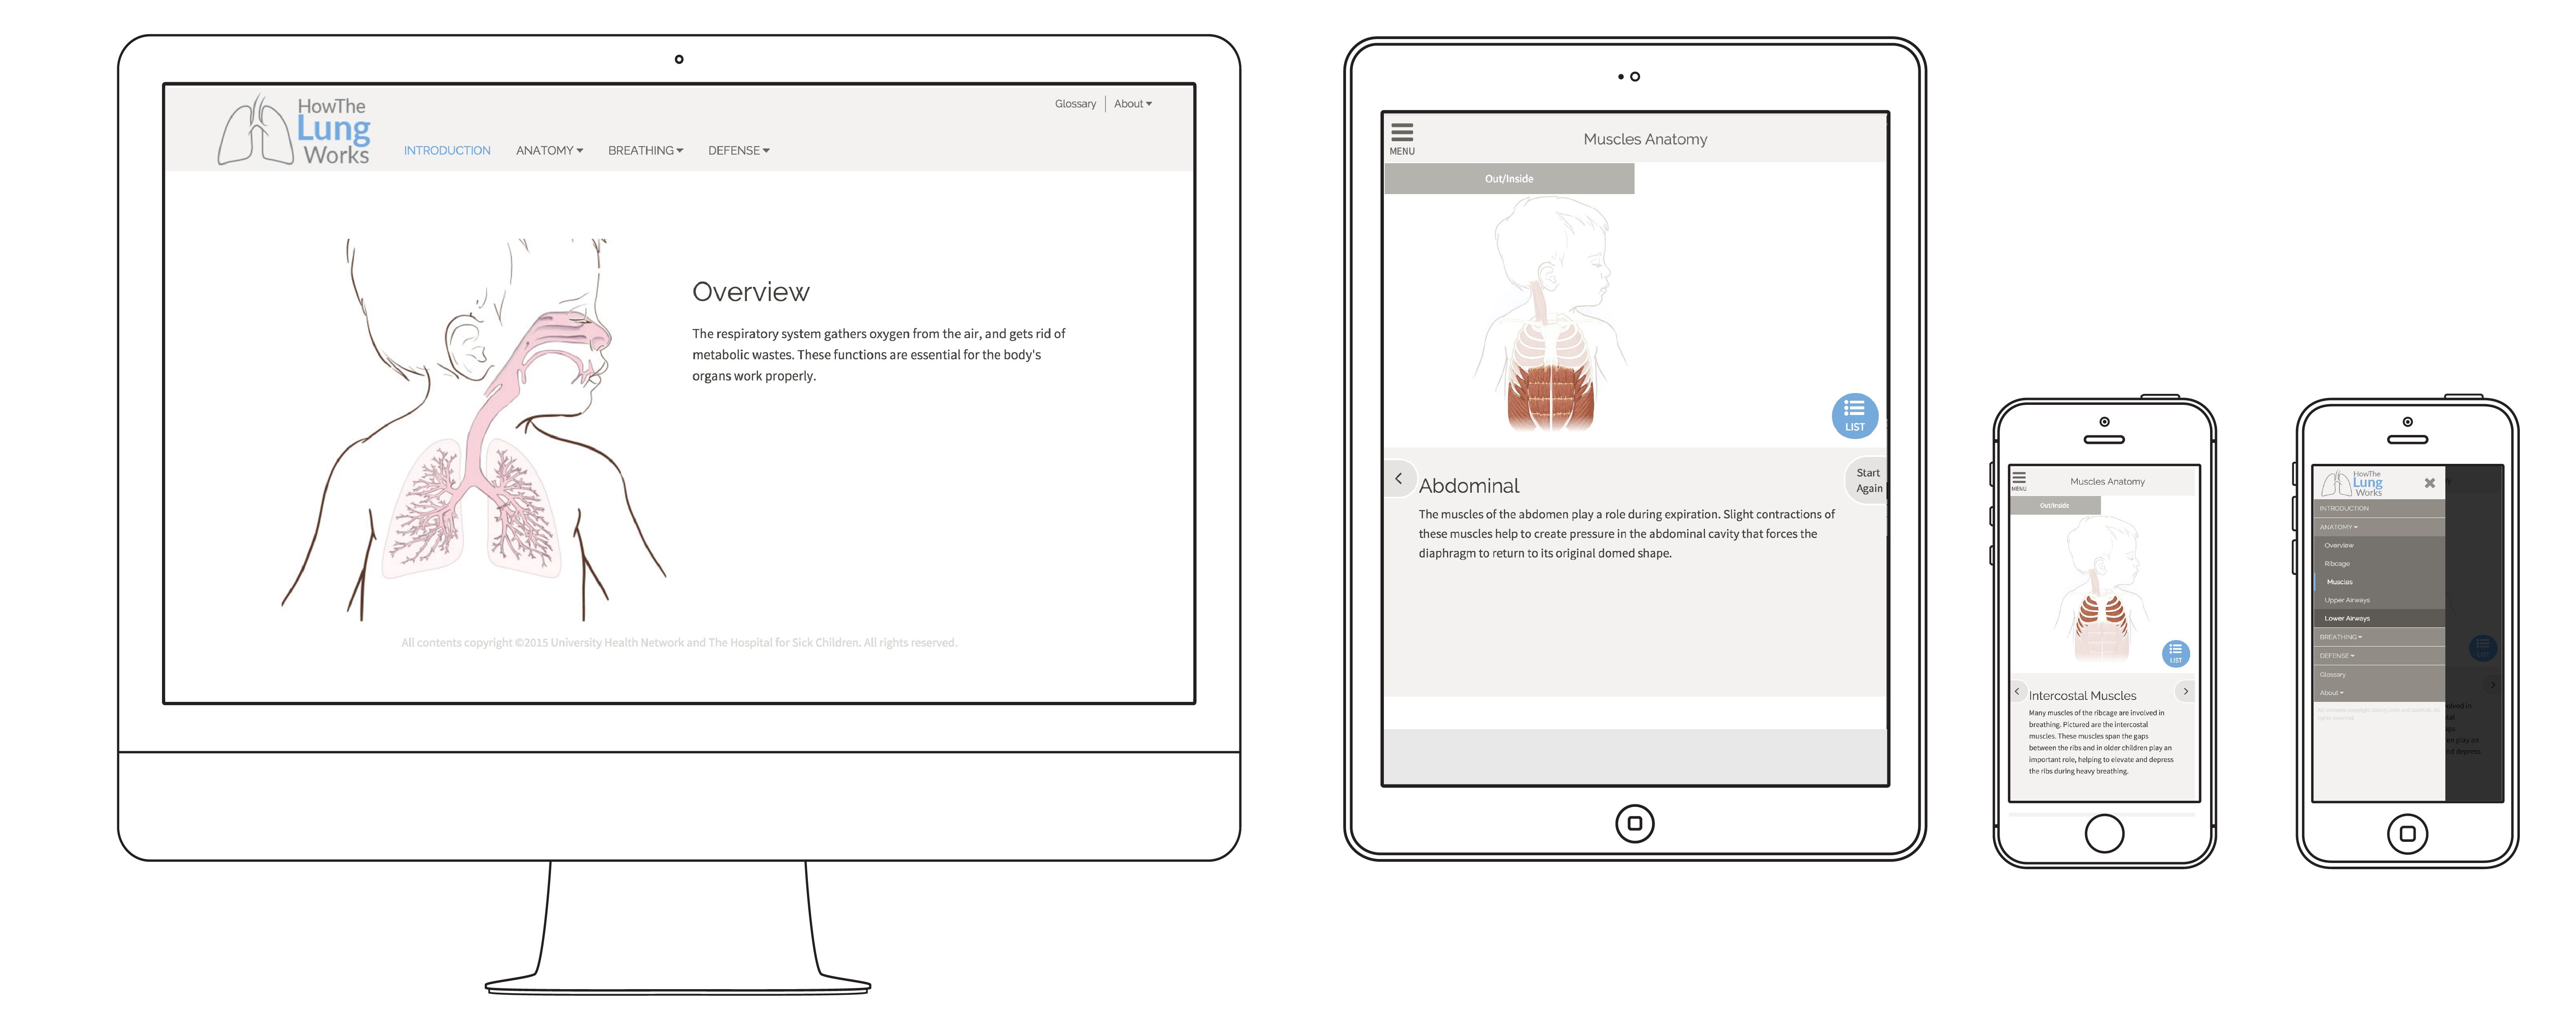 Responsive Design image of the website visible in desktop, tablet and mobile versions